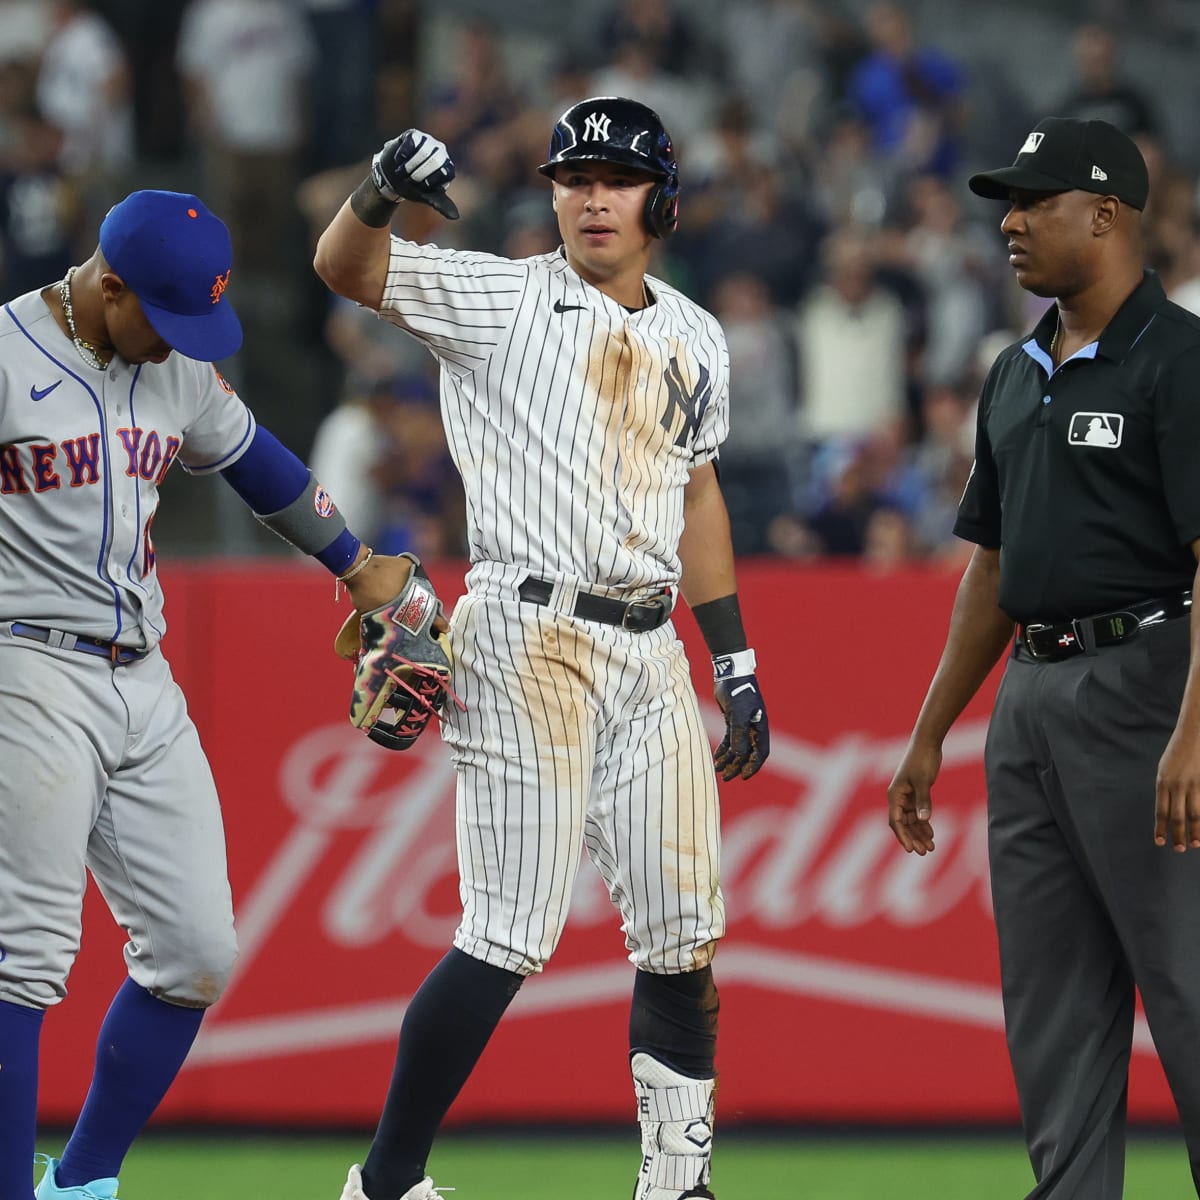 Mets Deteriorate While Four Core Yankees Sustain Themselves - The